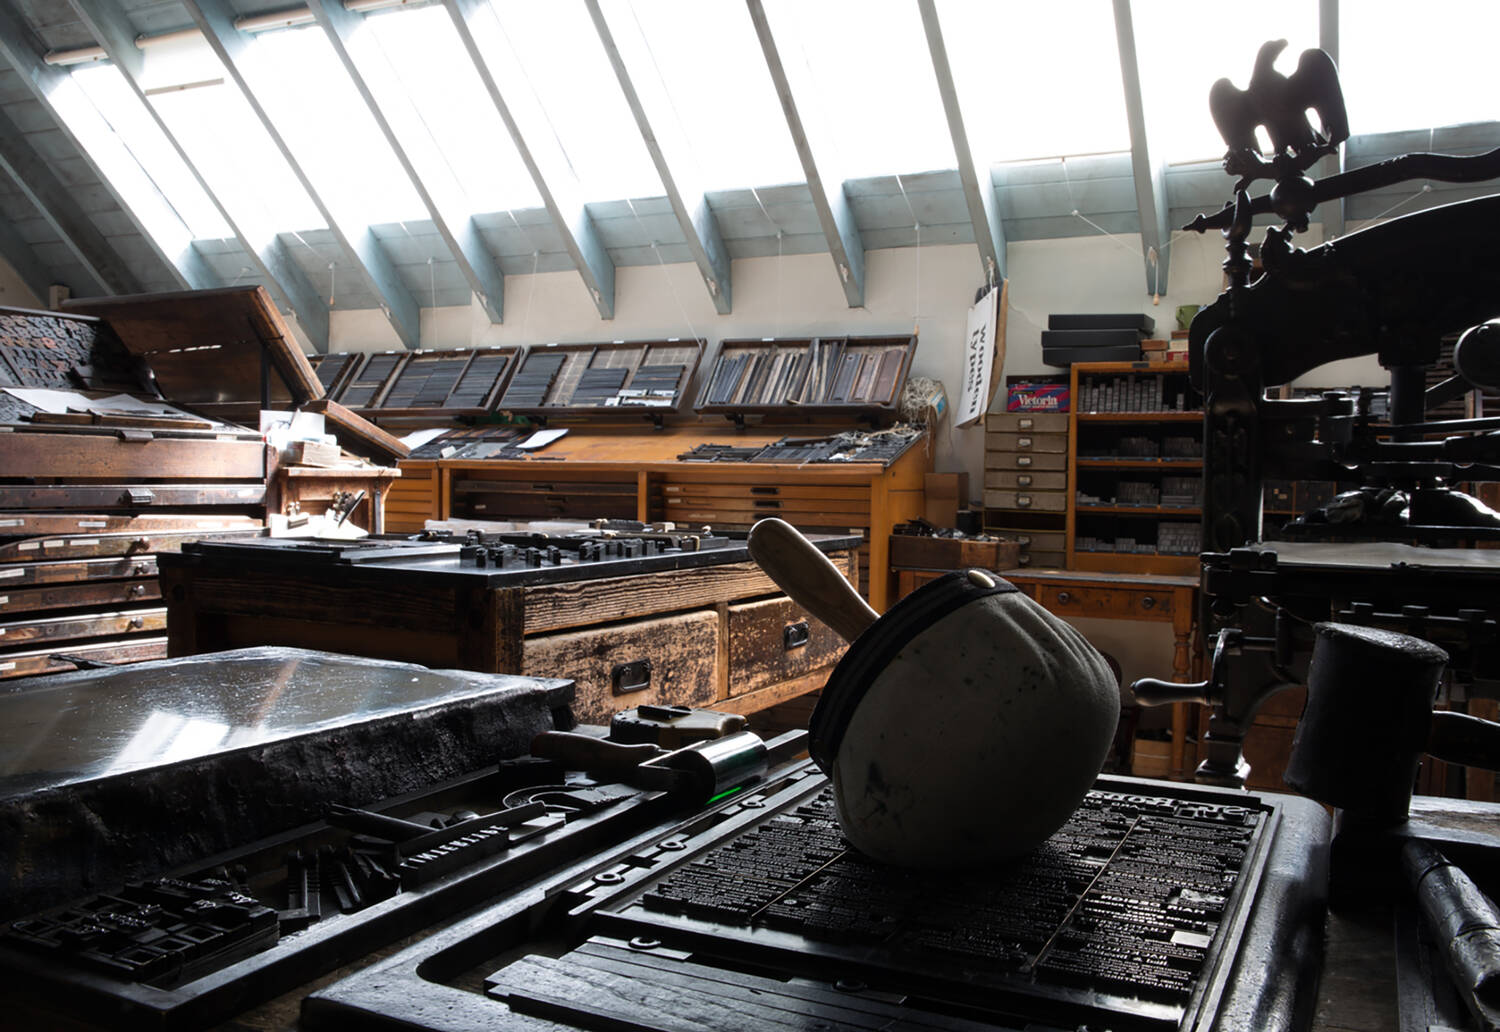 A view of the caseroom at Robert Smail's Printing Works. A cloth hammer lies on type of a case of set type in the foreground. In the background are many shelves filled with pieces of type.